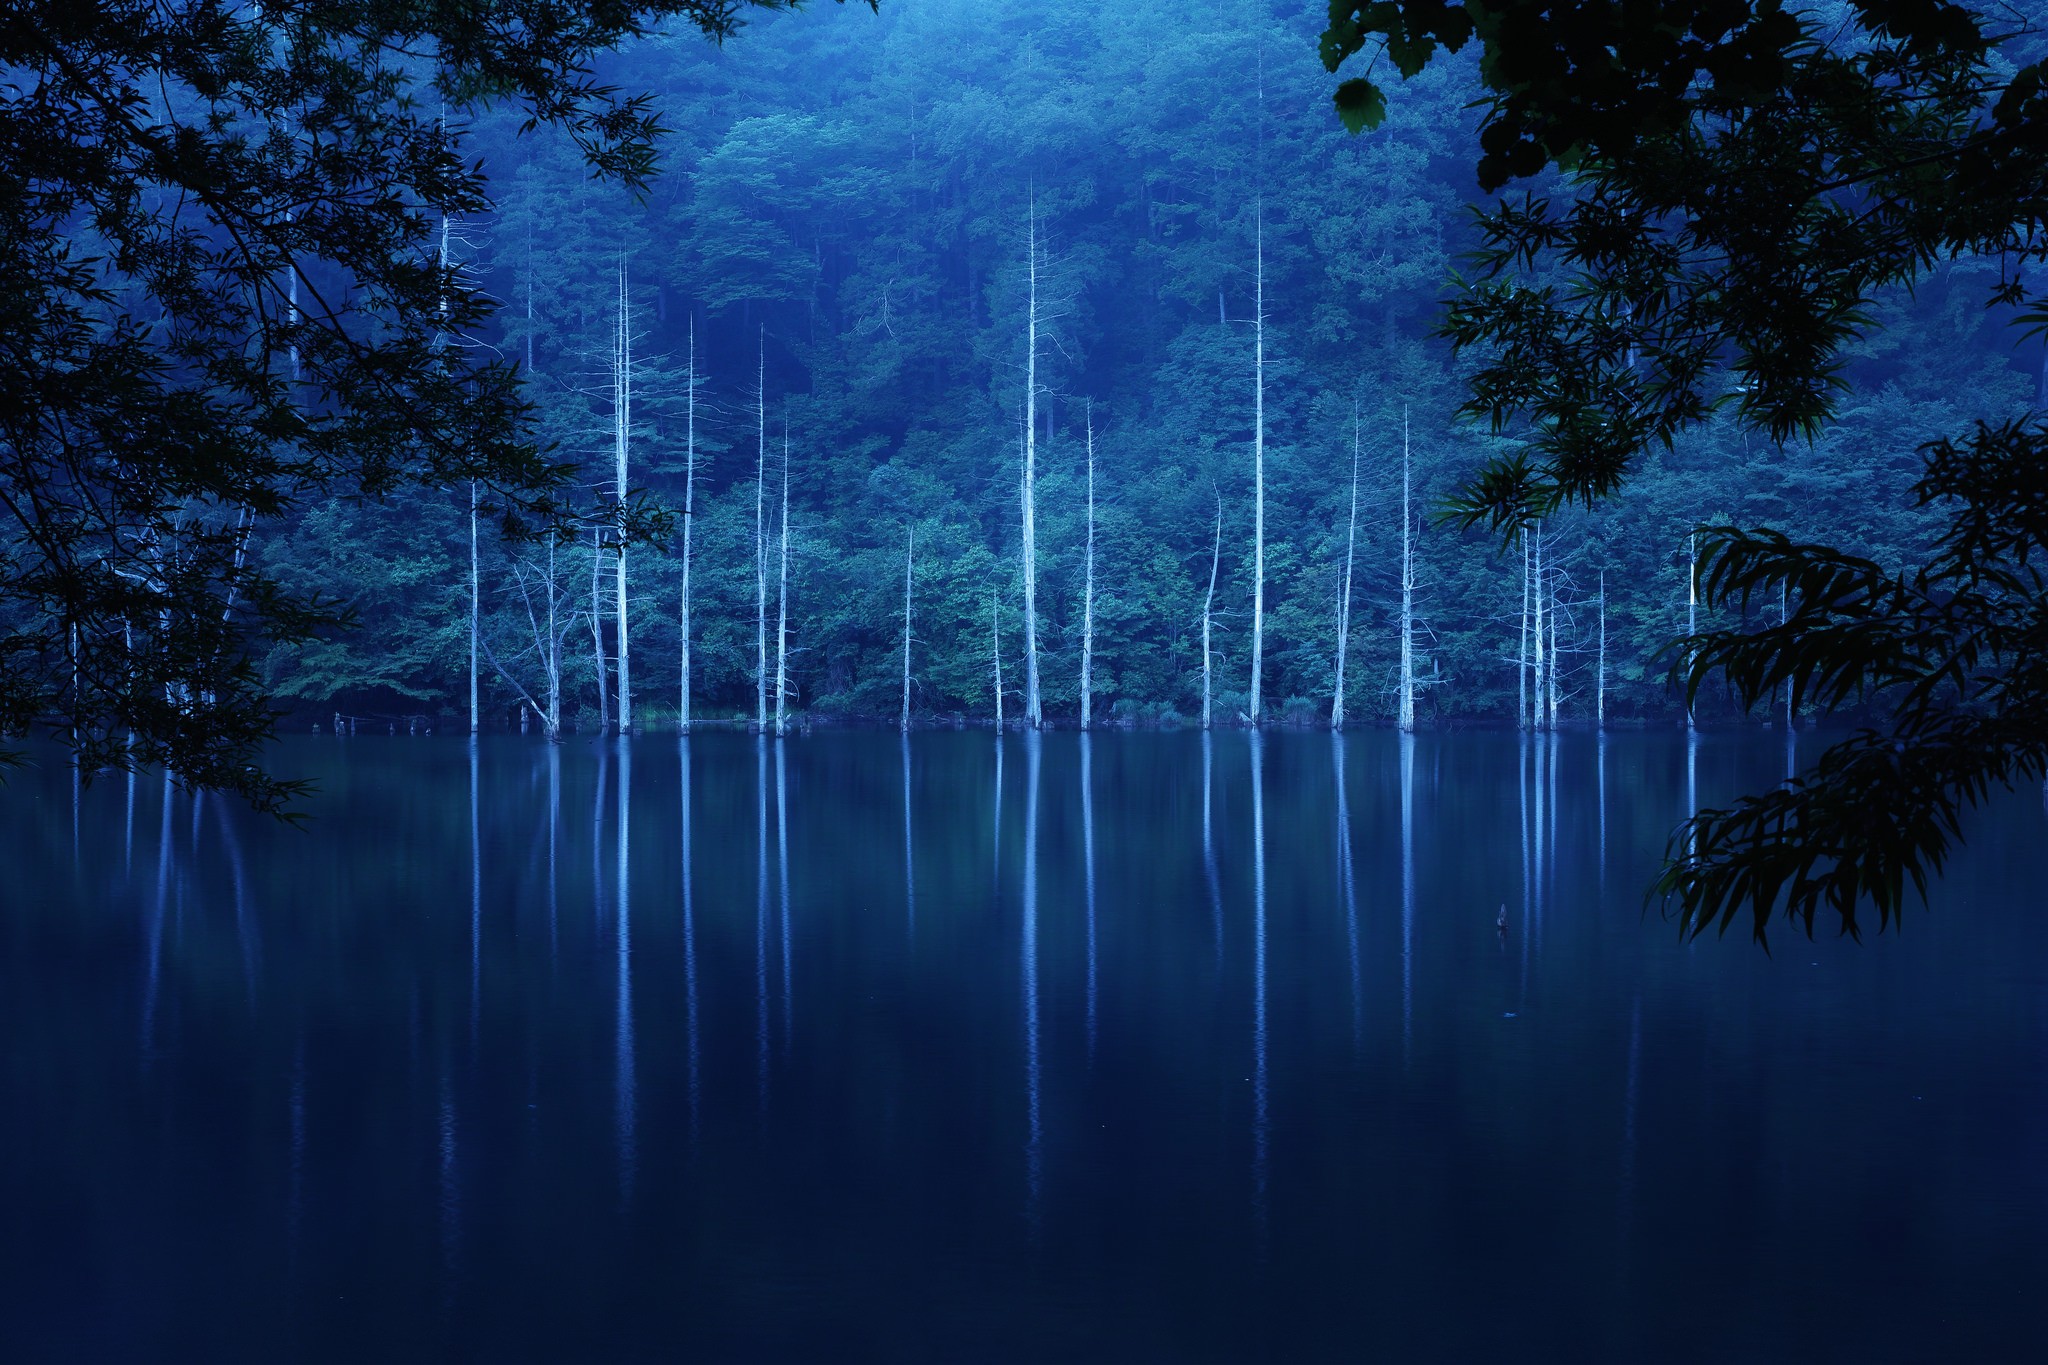 General 2048x1365 forest trees lake landscape nature reflection outdoors low light